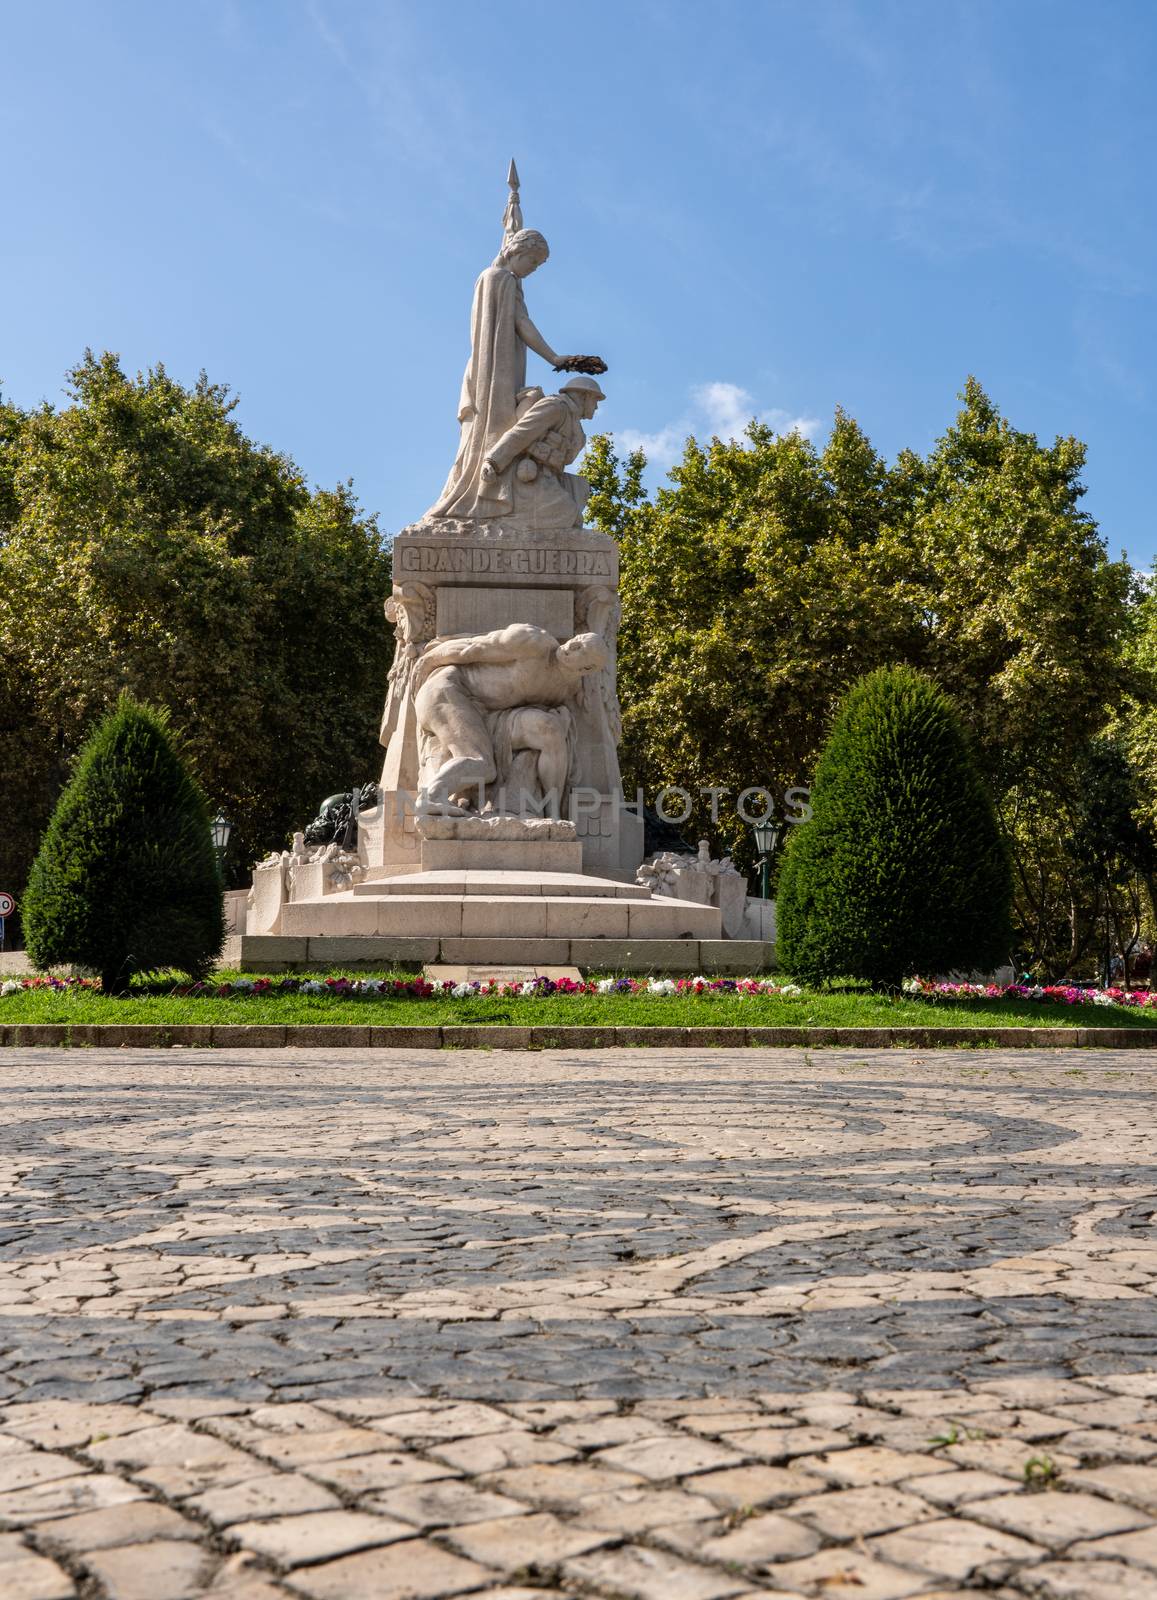 Monument to the dead of the Great War in Lisbon by steheap